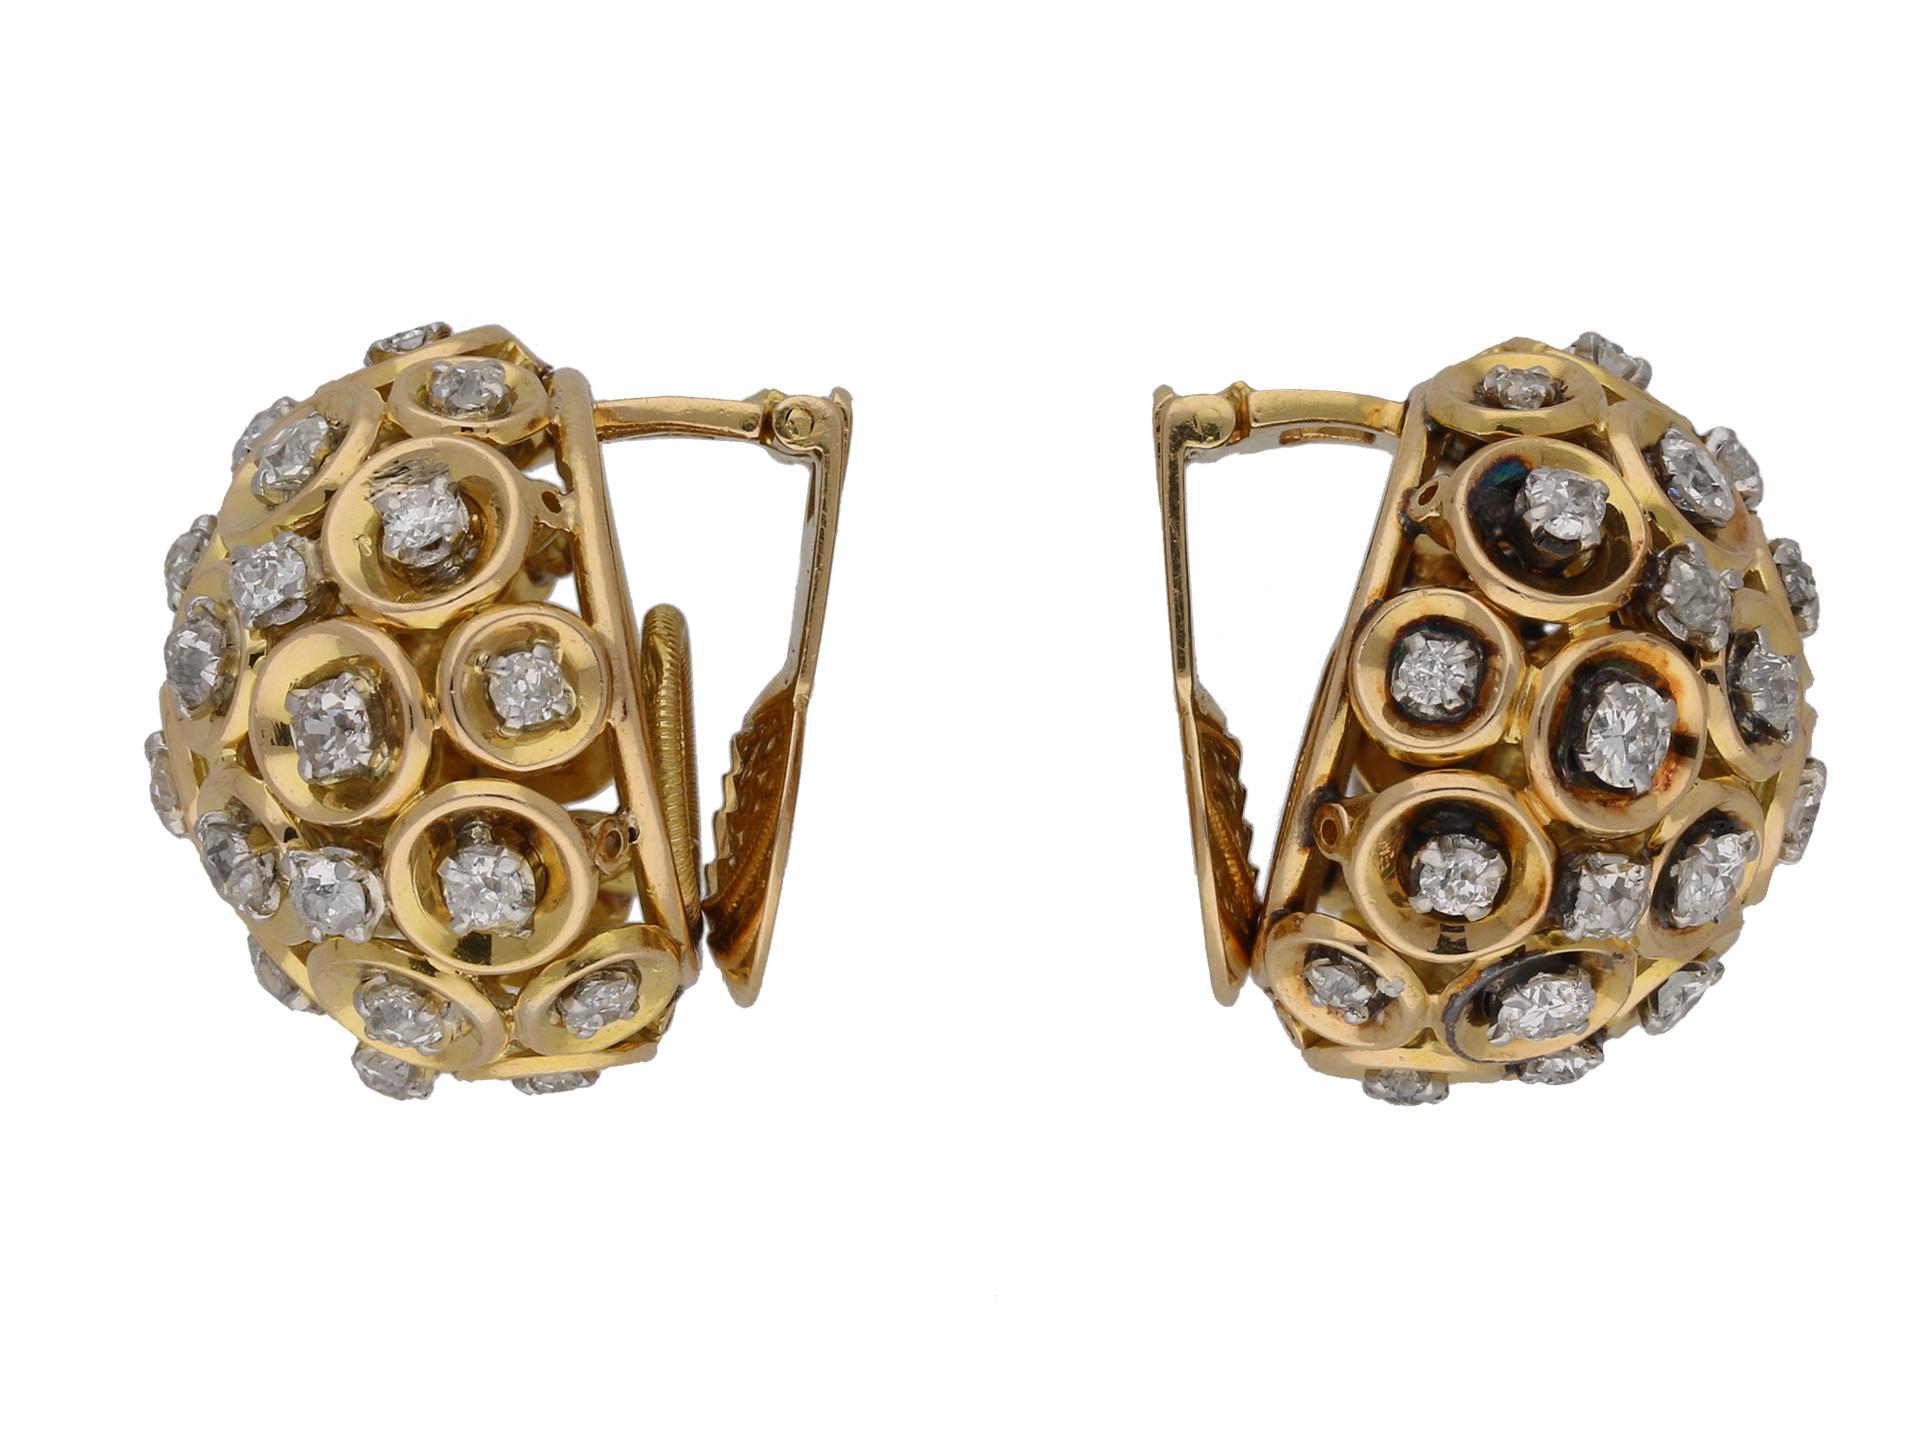 Boucheron diamond and gold clip earrings. A matching pair, each set with thirty one round mixed old cut diamonds in open back claw settings, sixty two in total with a combined approximate weight of 5.80 carats, to a pierced bombé cluster design